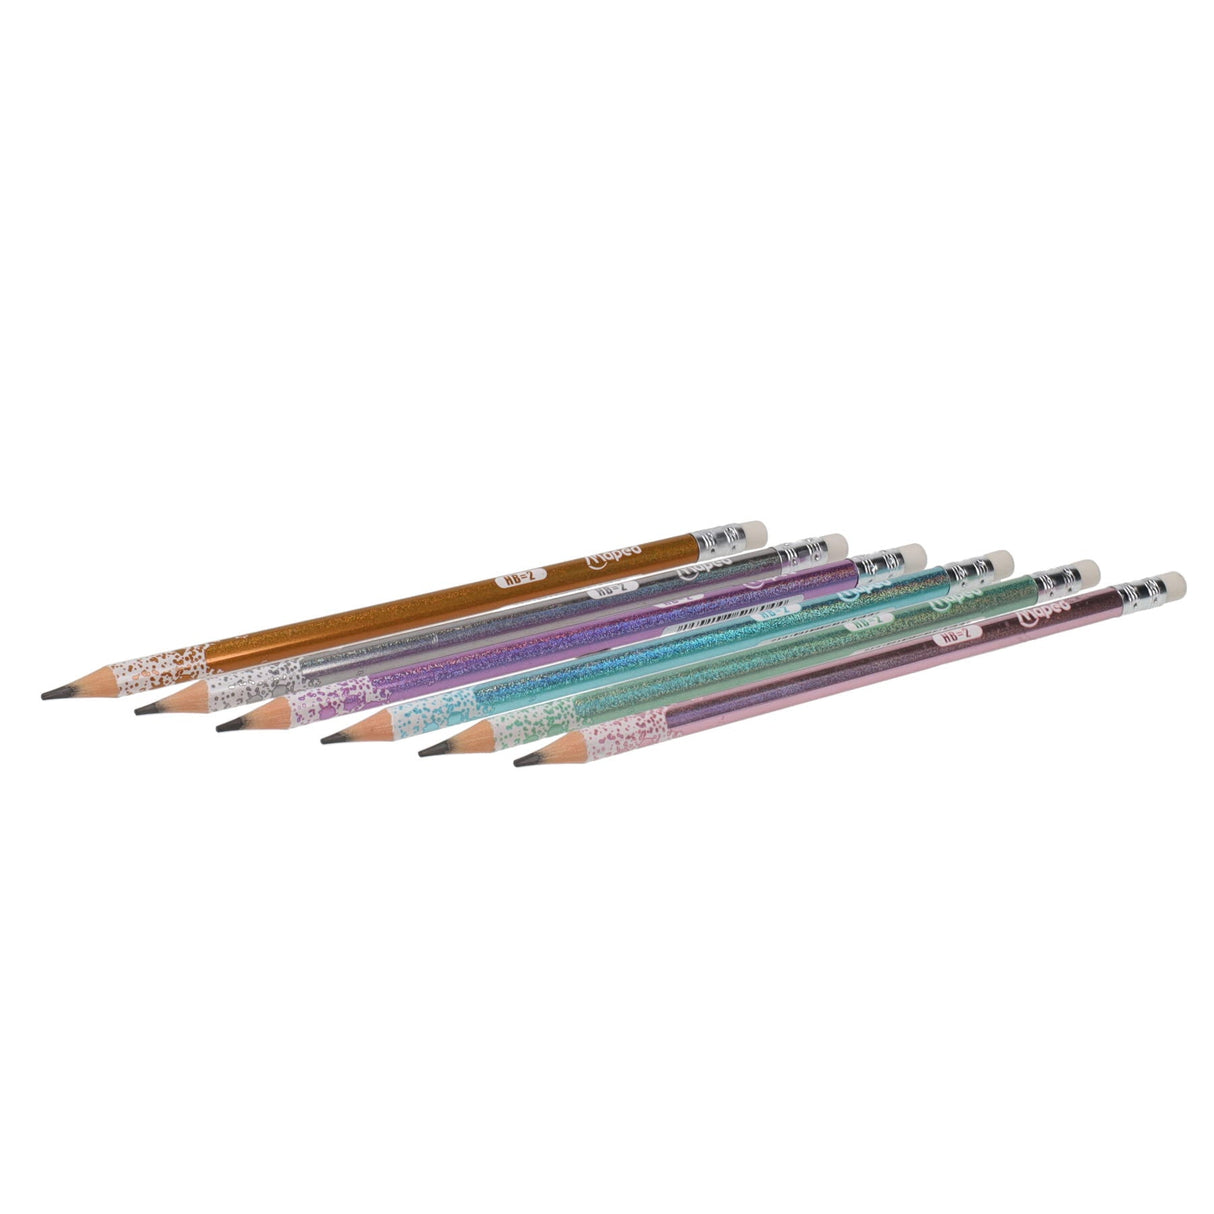 Maped Graph Hb Glitter Pencils with Eraser - Pack of 6-Pencils-Maped|StationeryShop.co.uk